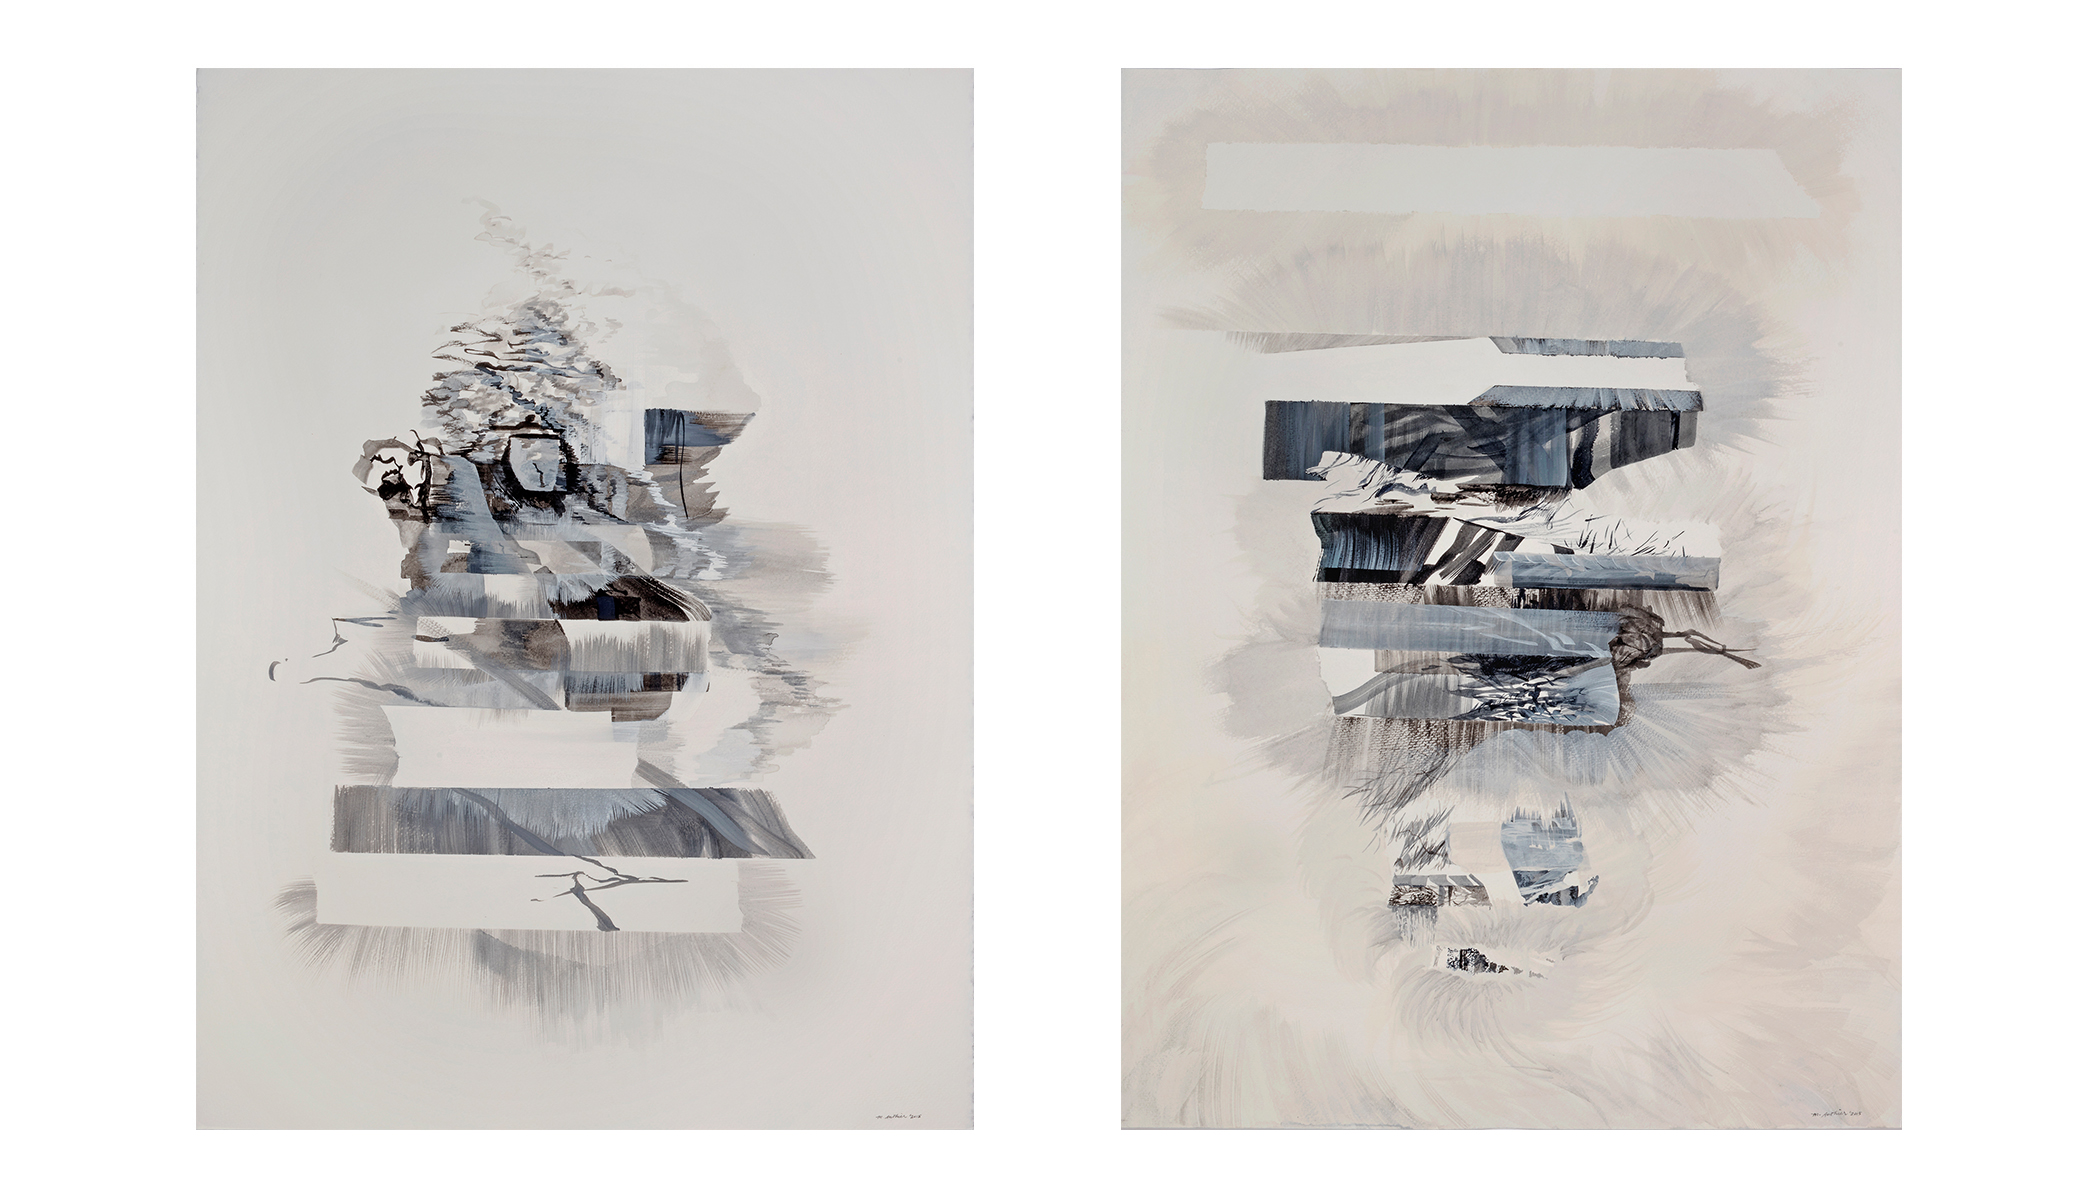   Vestiges and Thieveries - diptych , 2015  watercolour and ink on paper  30" x 44" 